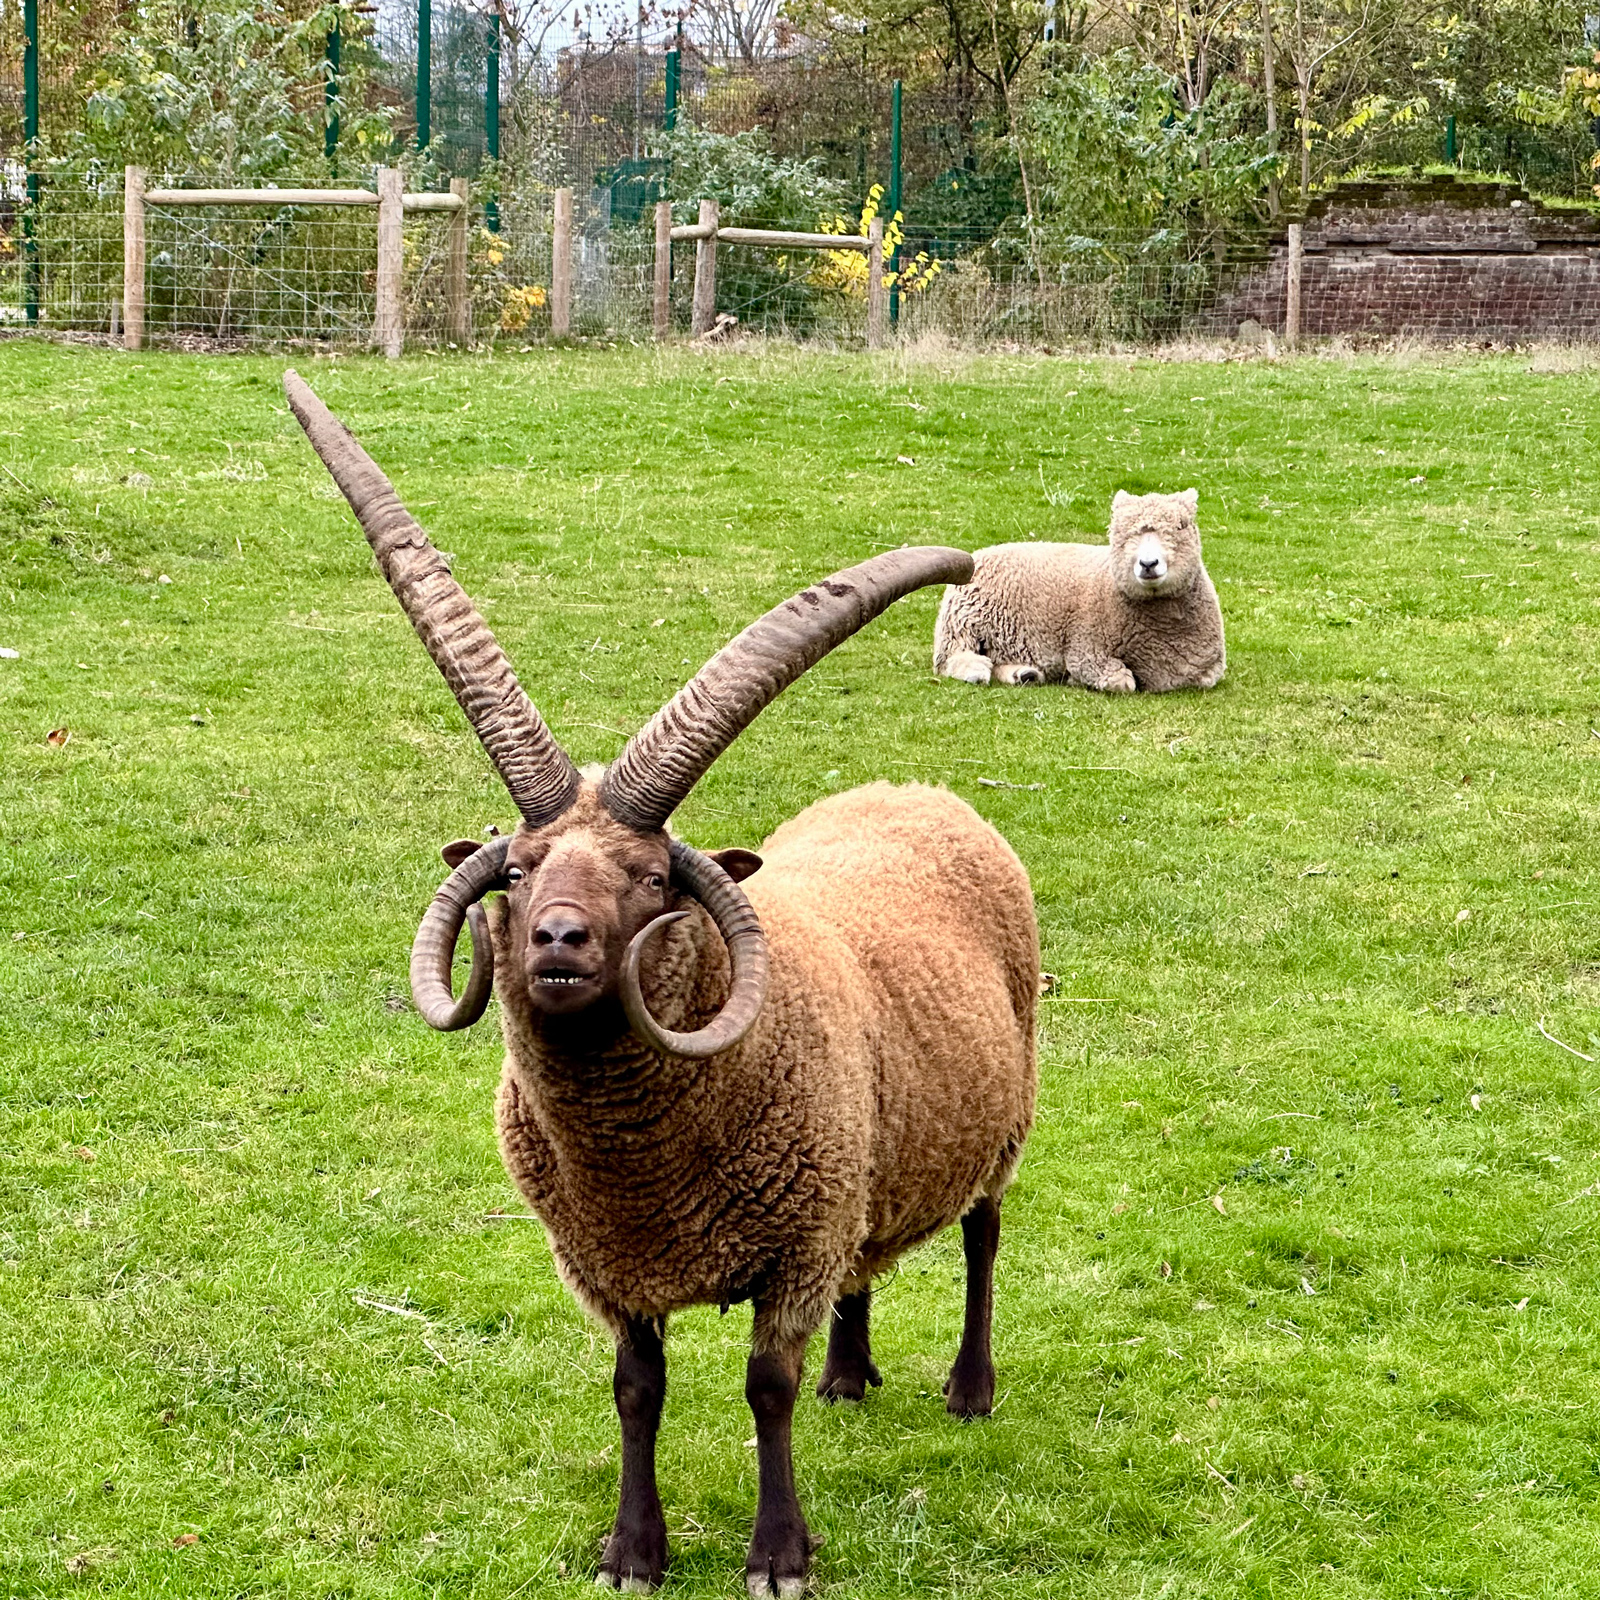 A sheep with a very impressive double set of horns